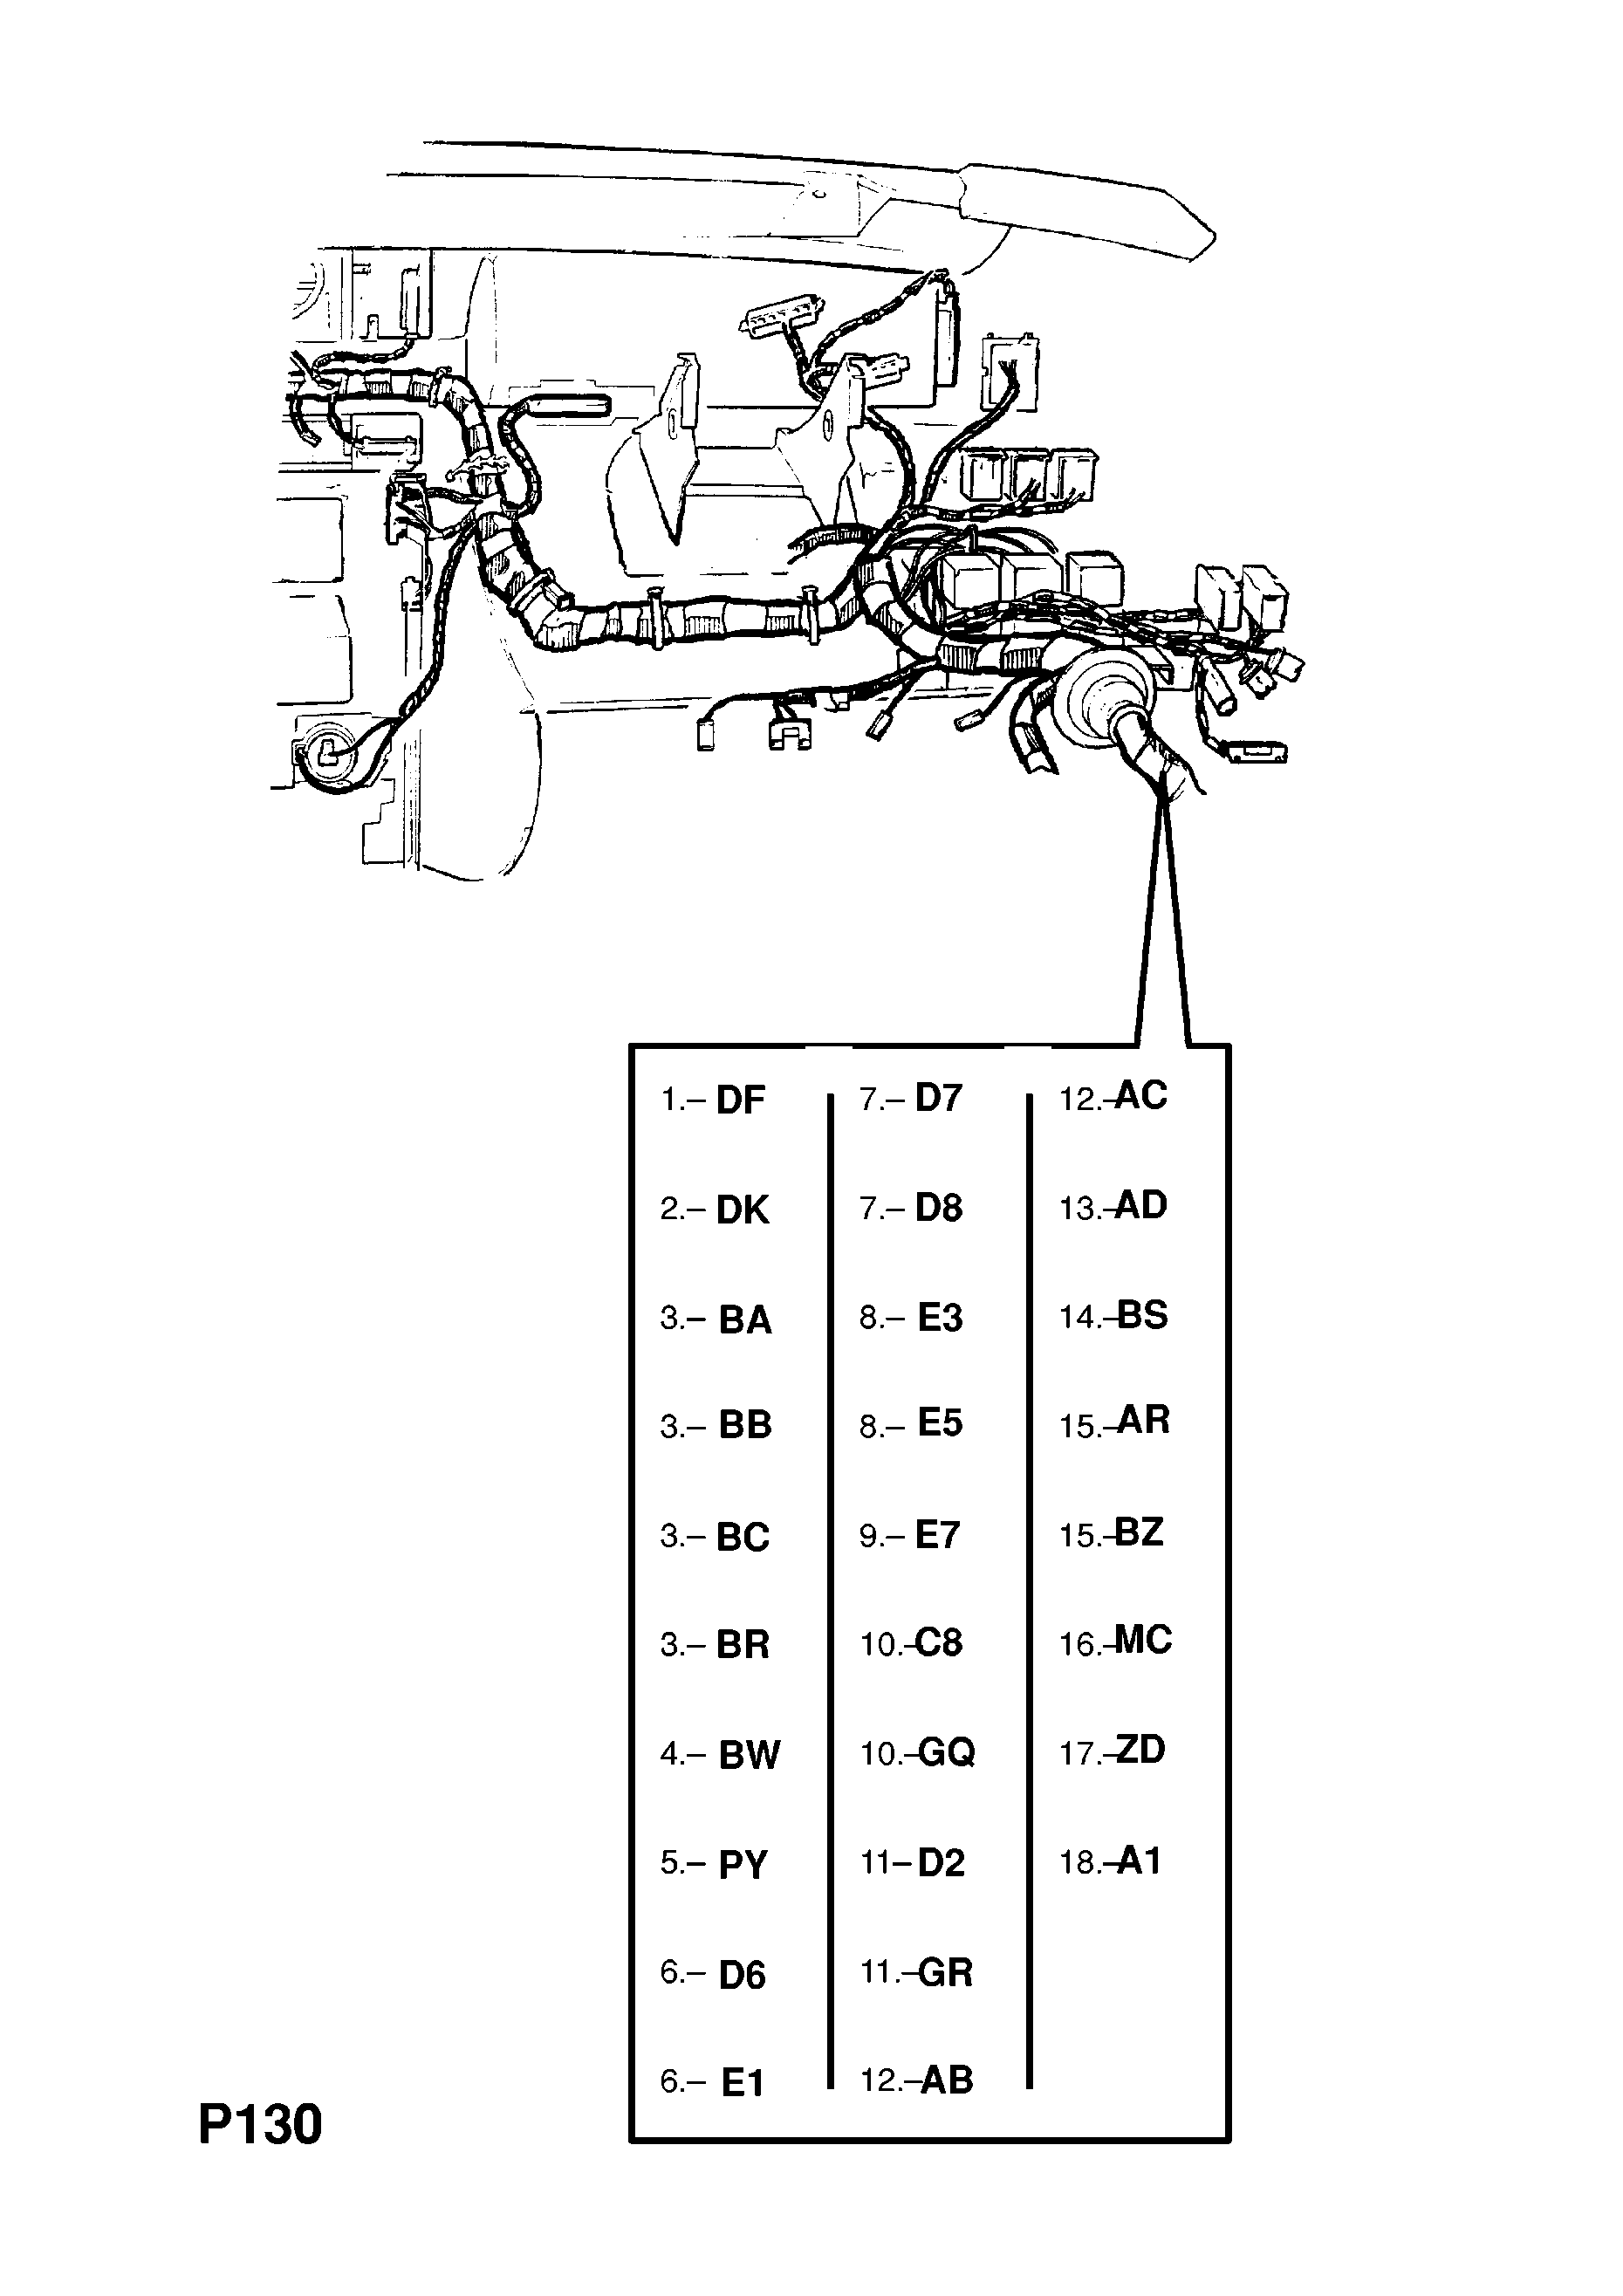 INSTRUMENT PANEL WIRING HARNESS <small><i>[H1000001-L1999999 EXCEPT AIR CONDITIONING, AUTOMATIC TRANSMISSION OR LCD INSTRUMENTS]</i></small>